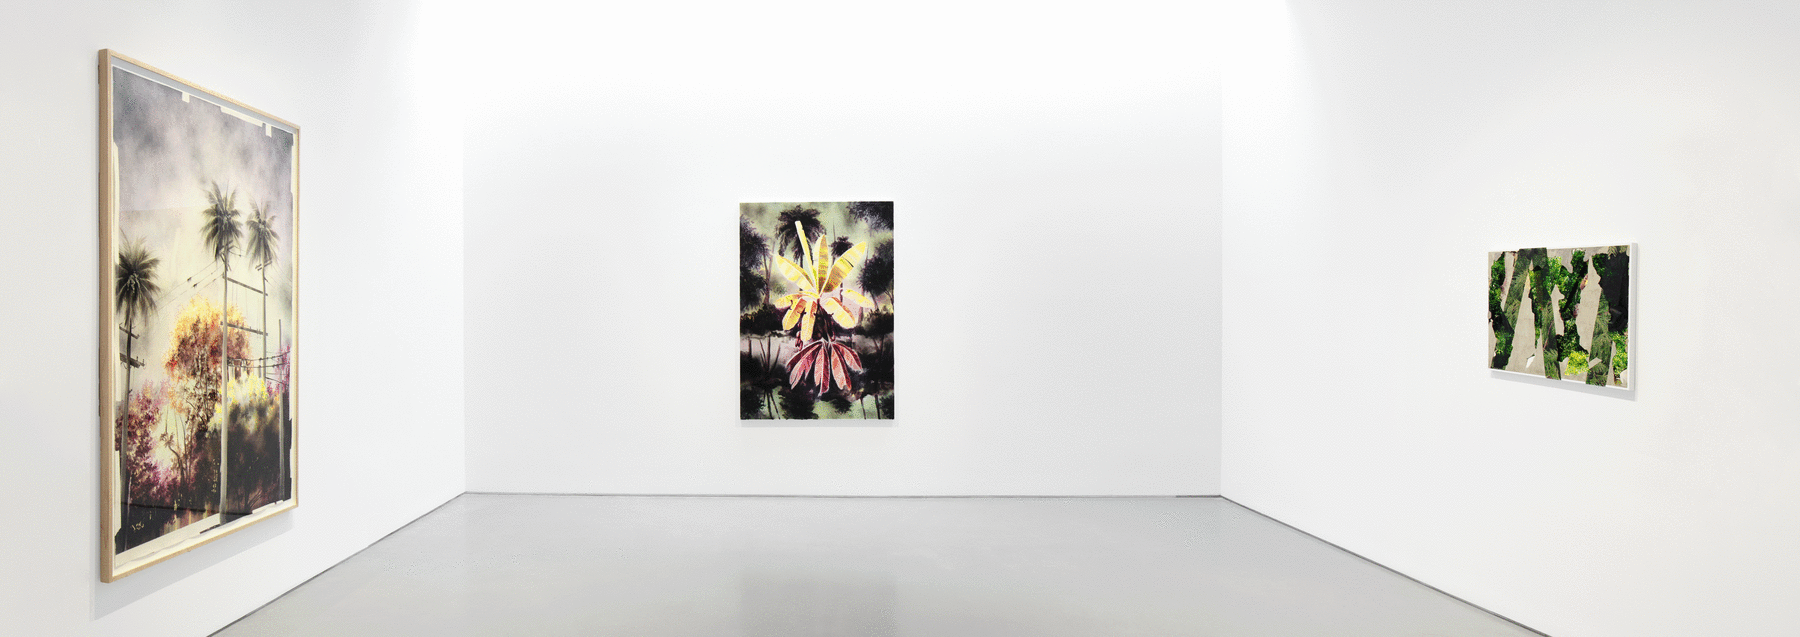 Installation view of three colorful artworks depicting nature hanging on adjacent white walls